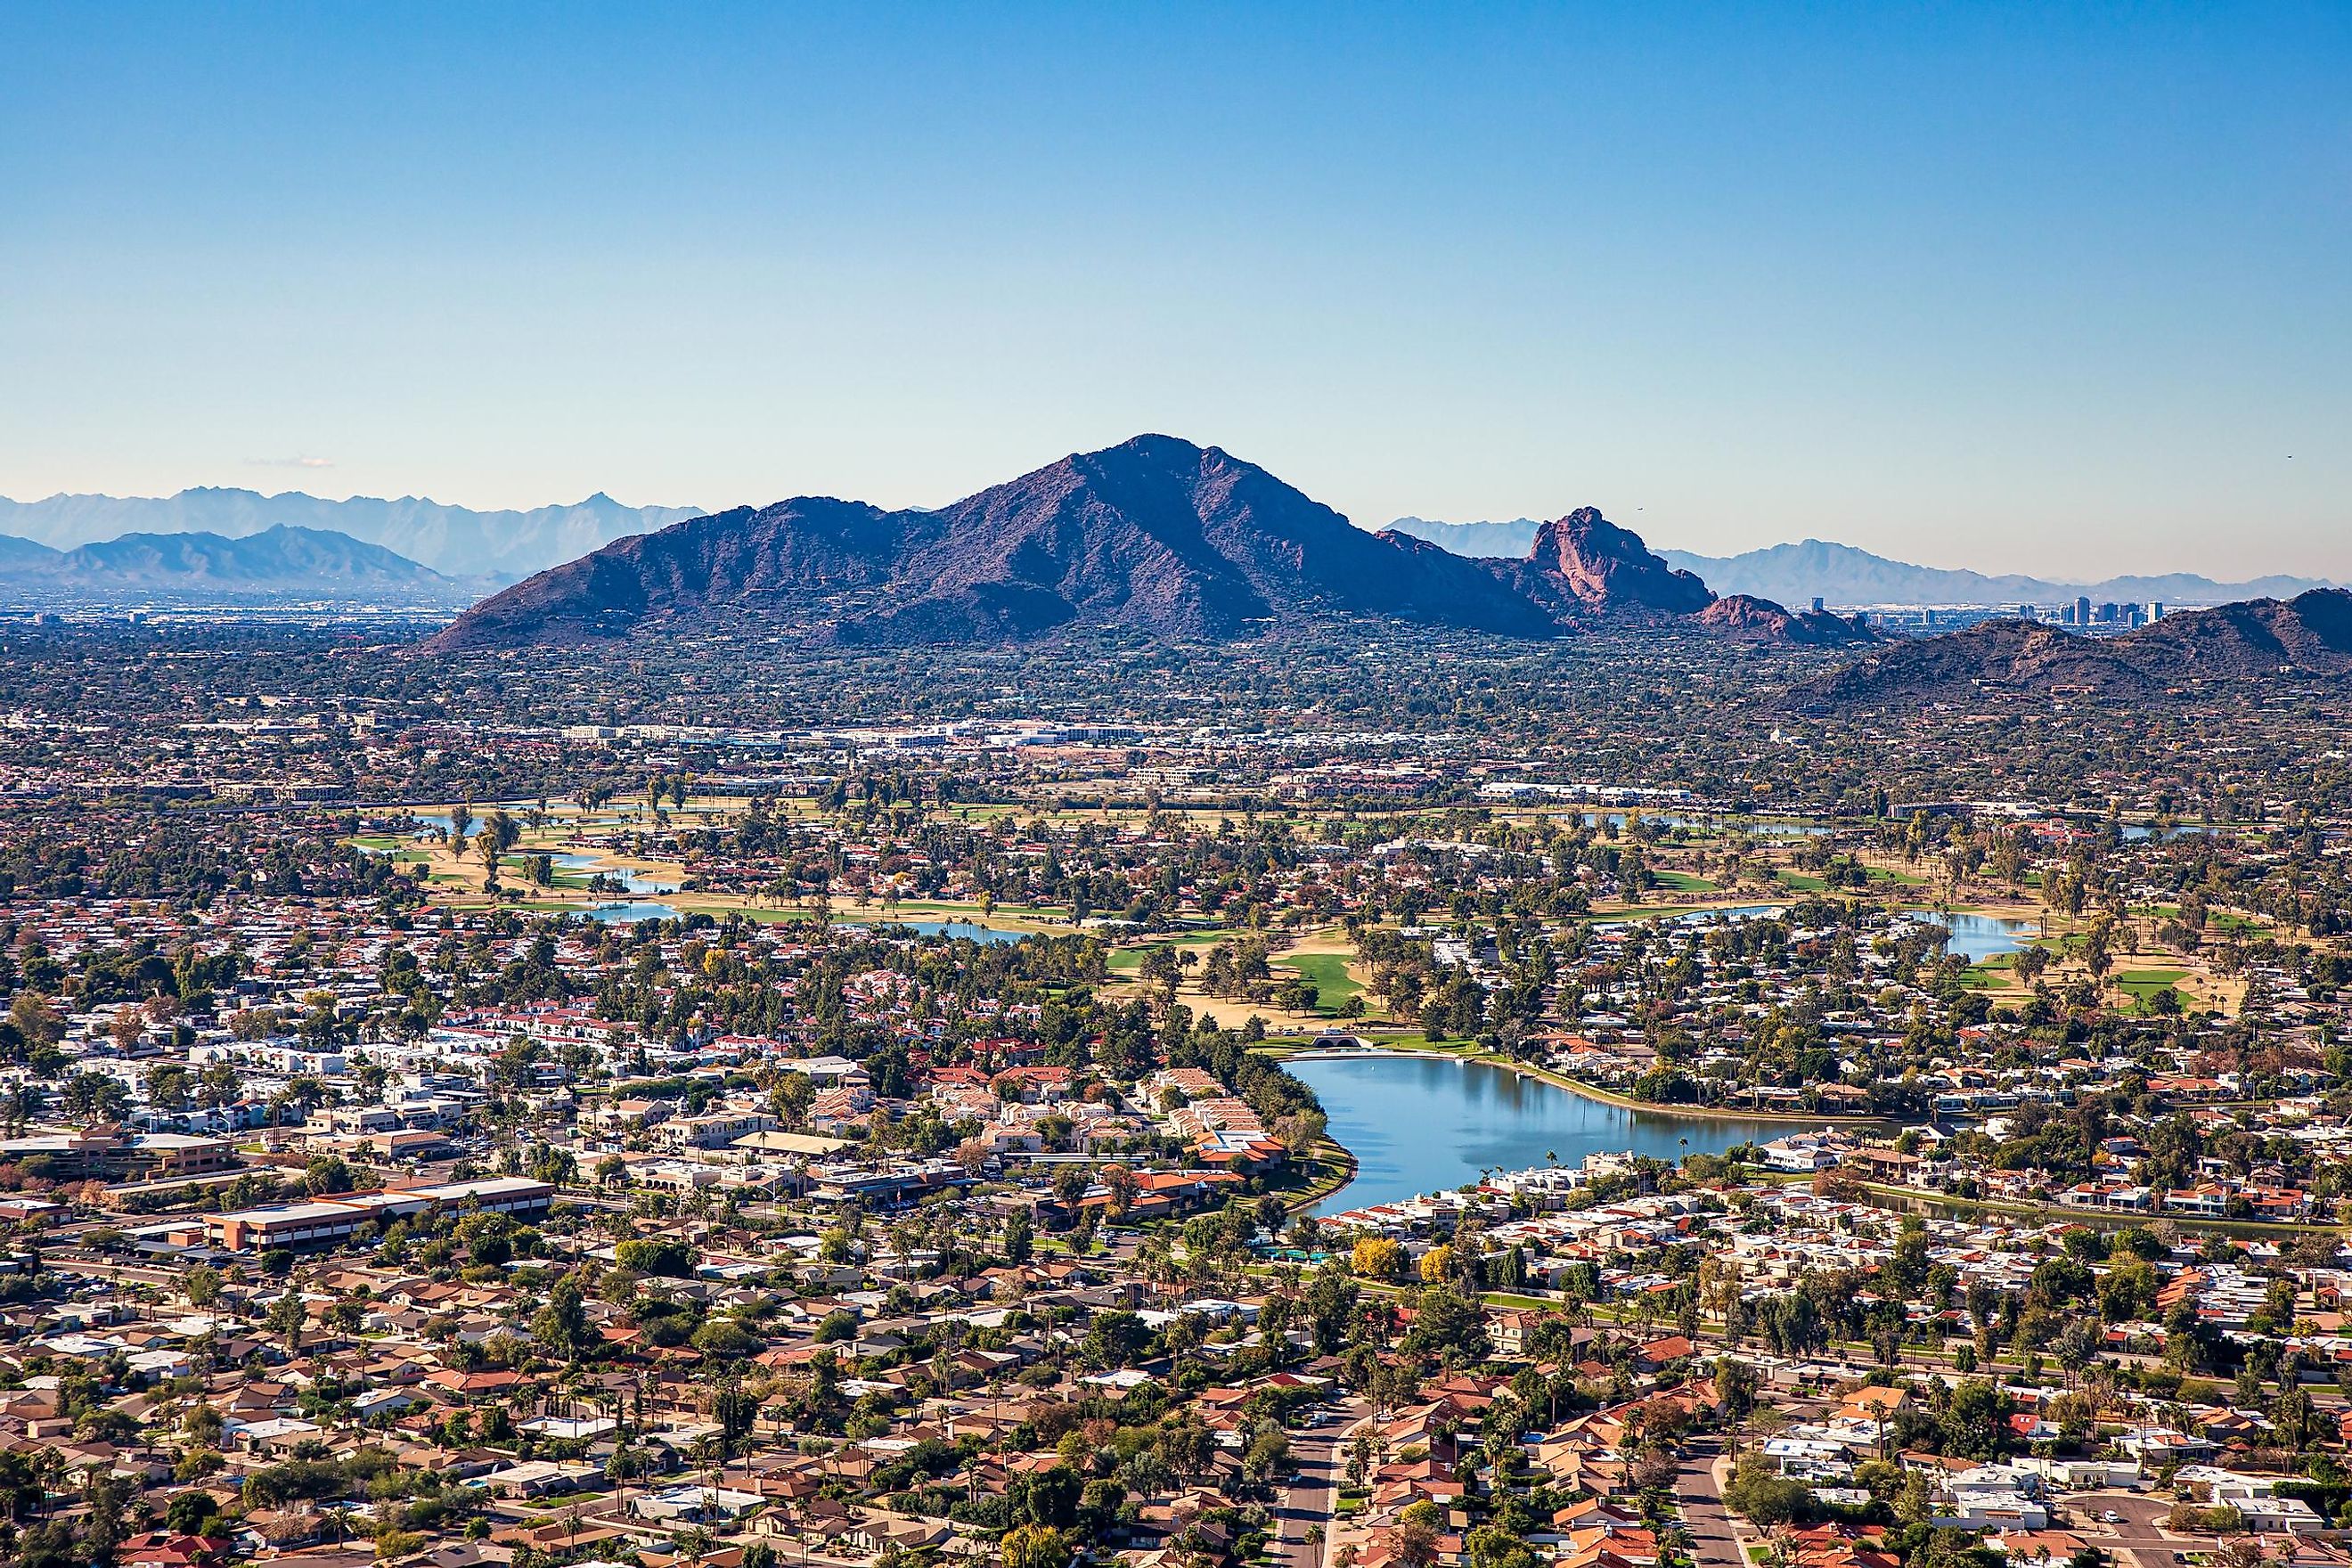 Above Scottsdale, Arizona looking SW towards Camelback Mountain and downtown Phoenix